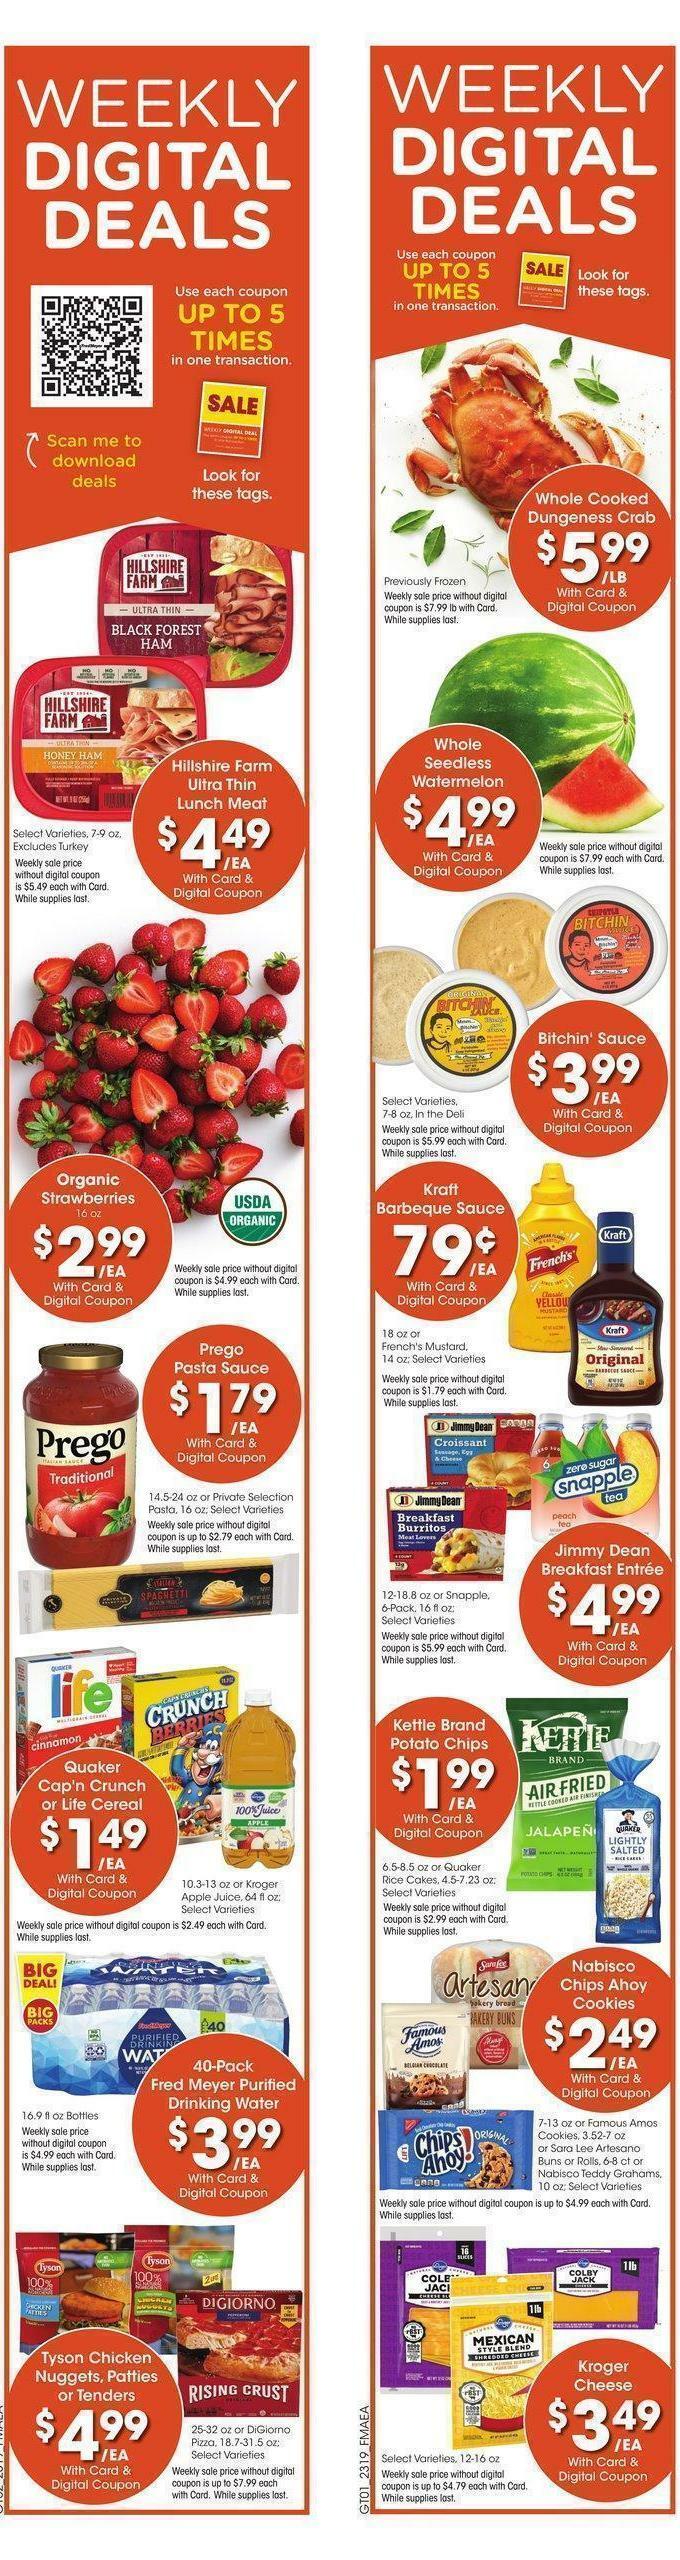 Fred Meyer Weekly Ad from June 7